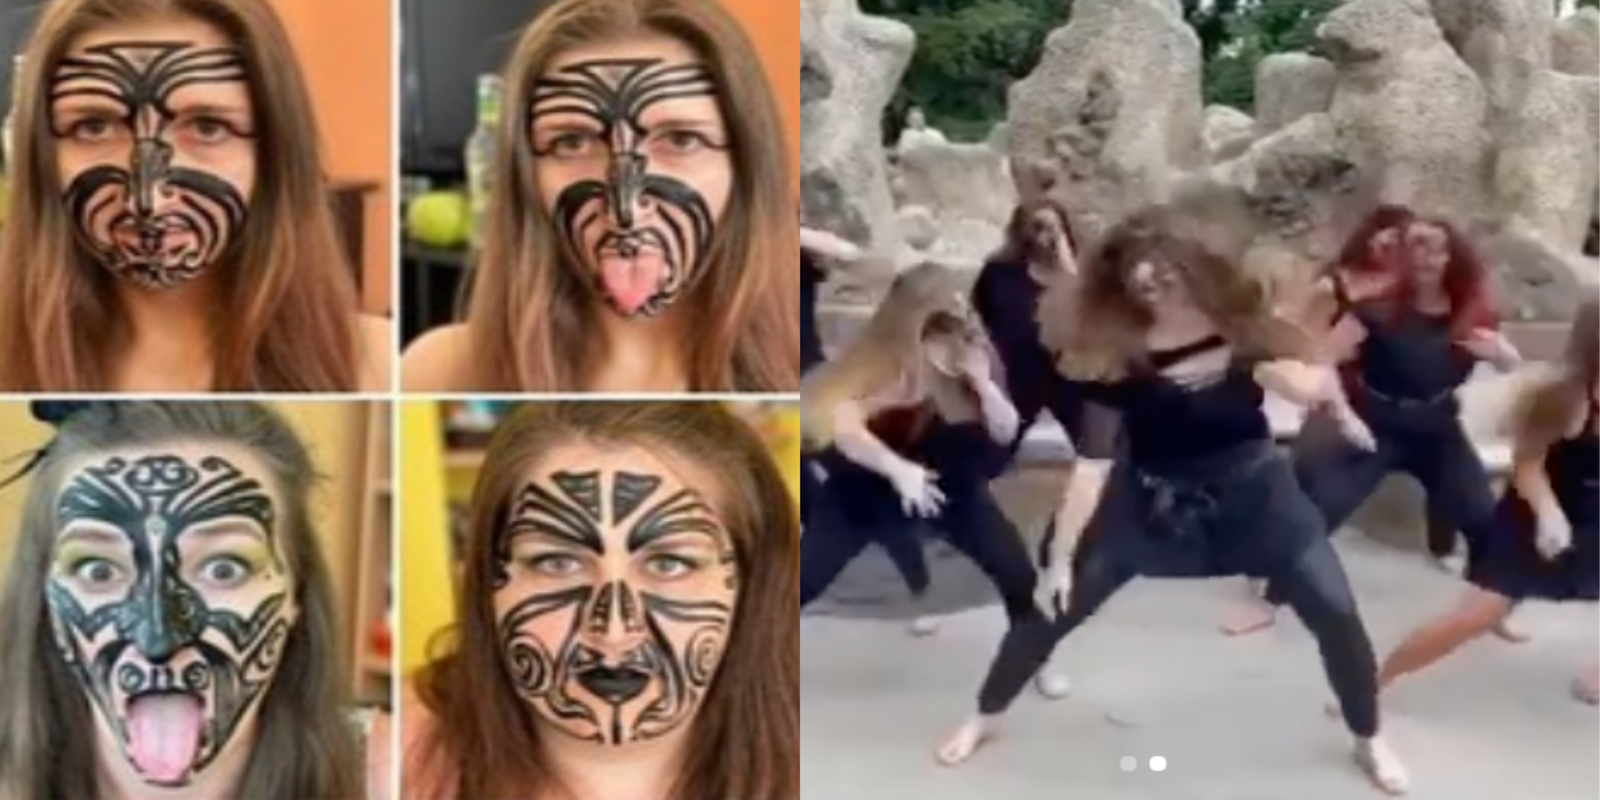 Screenshots of Czech Republic dance group with face painted Maori face tattoos on the left and performing a 'Bollywood Haka' dance fusion to the right